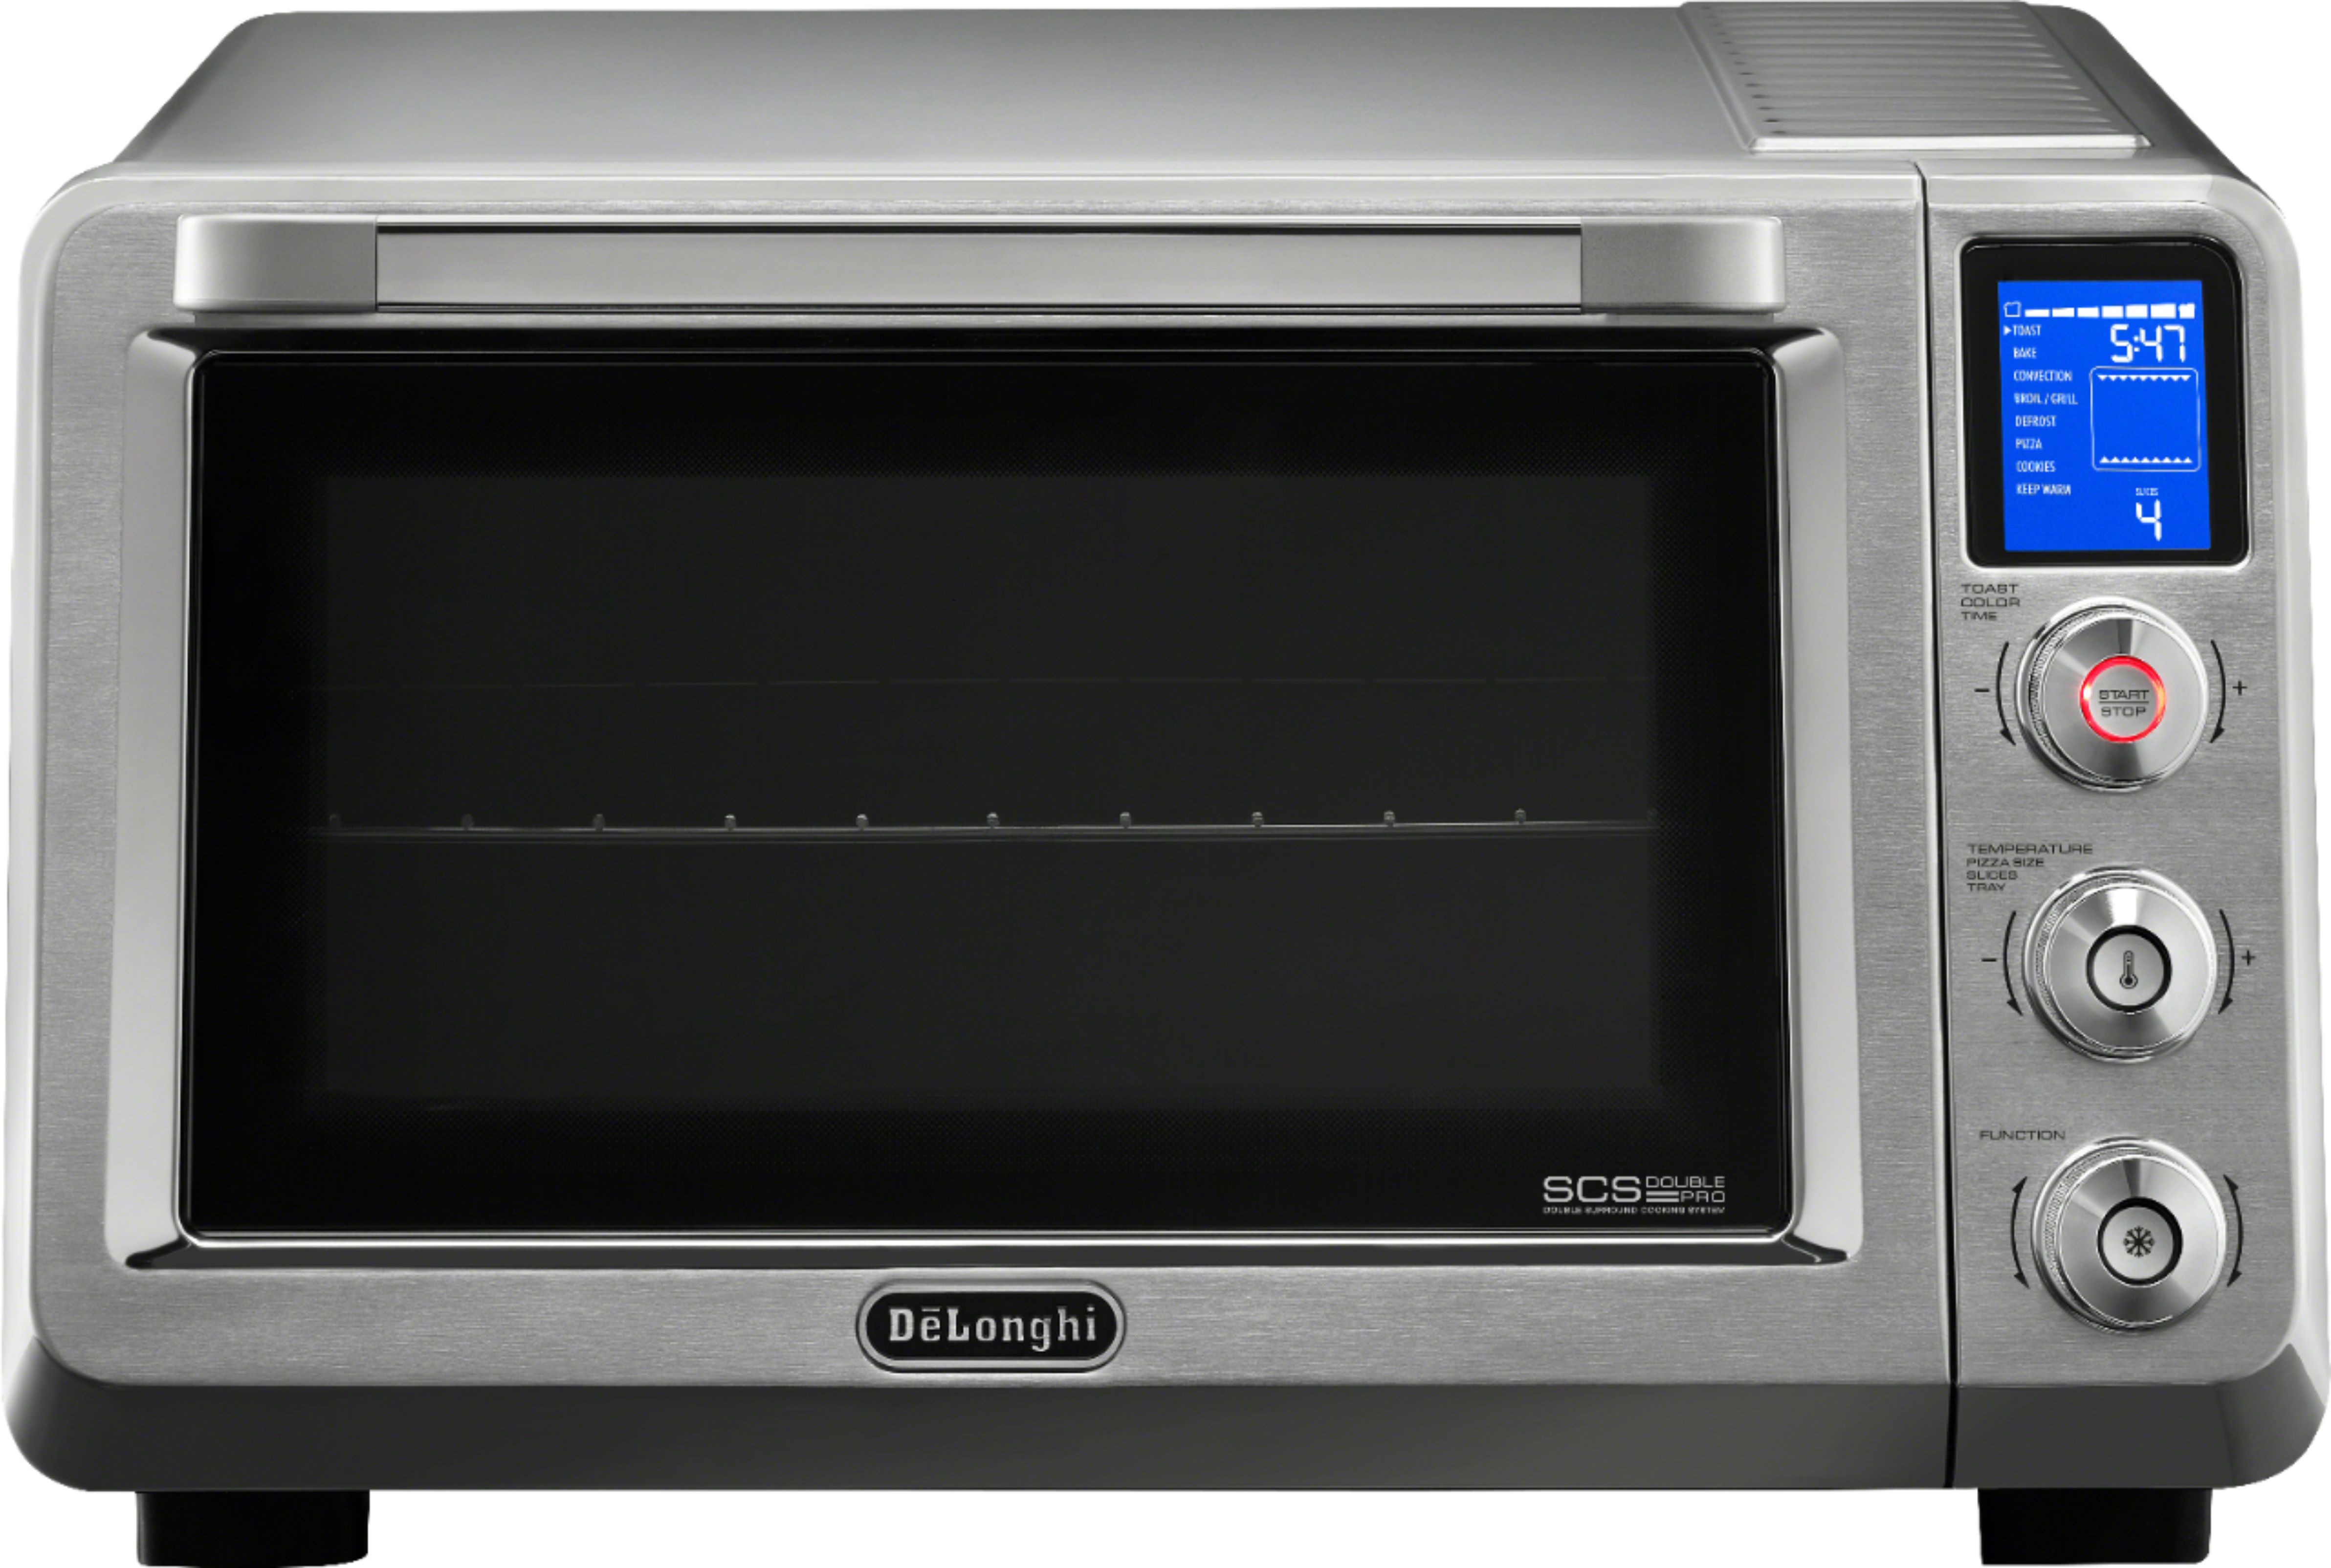 De'Longhi Small Convection Toaster Oven For Countertop With internal light  And 9 Preset Functions & Reviews